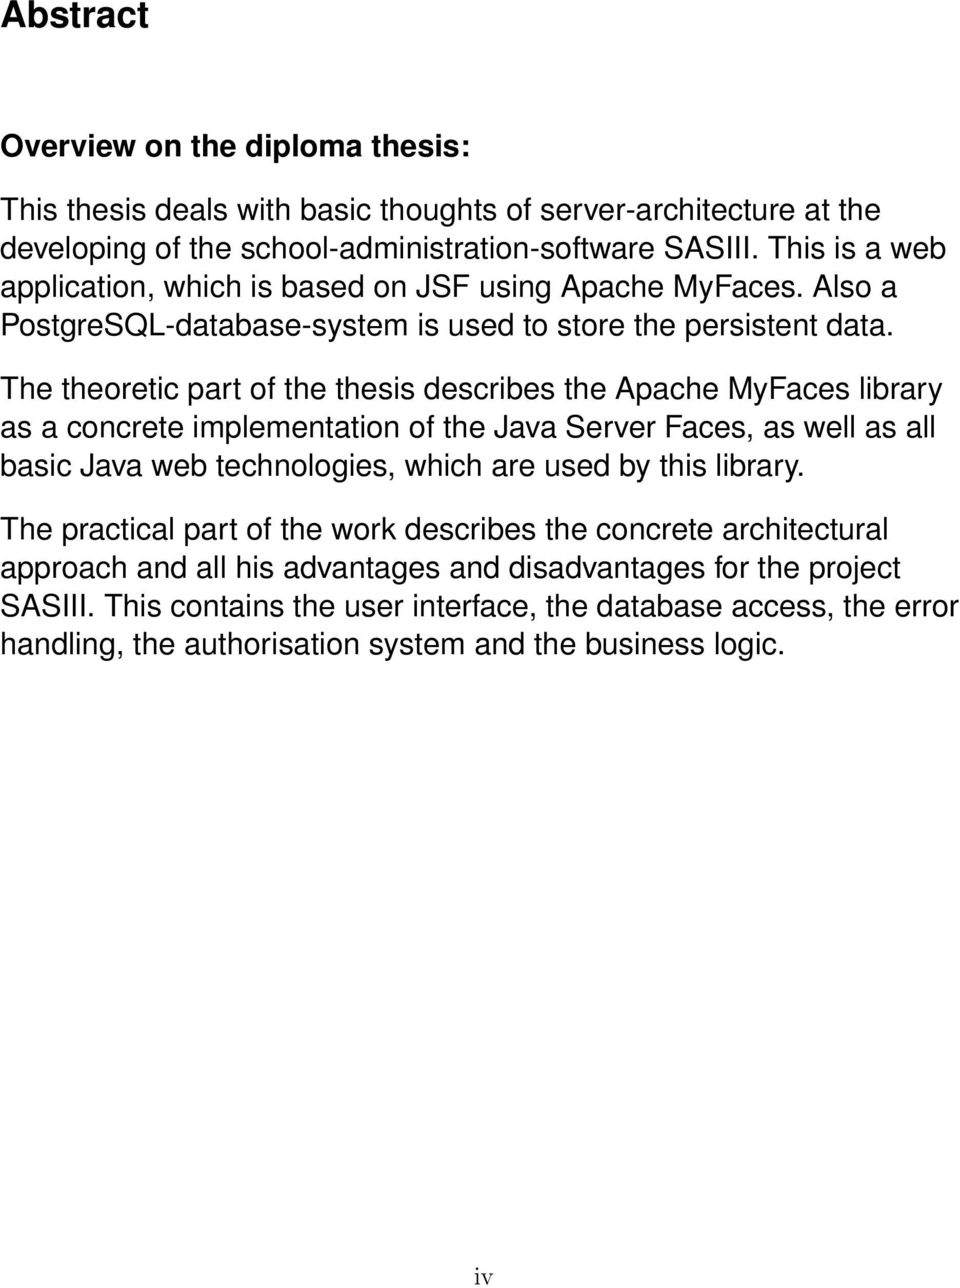 The theoretic part of the thesis describes the Apache MyFaces library as a concrete implementation of the Java Server Faces, as well as all basic Java web technologies, which are used by this